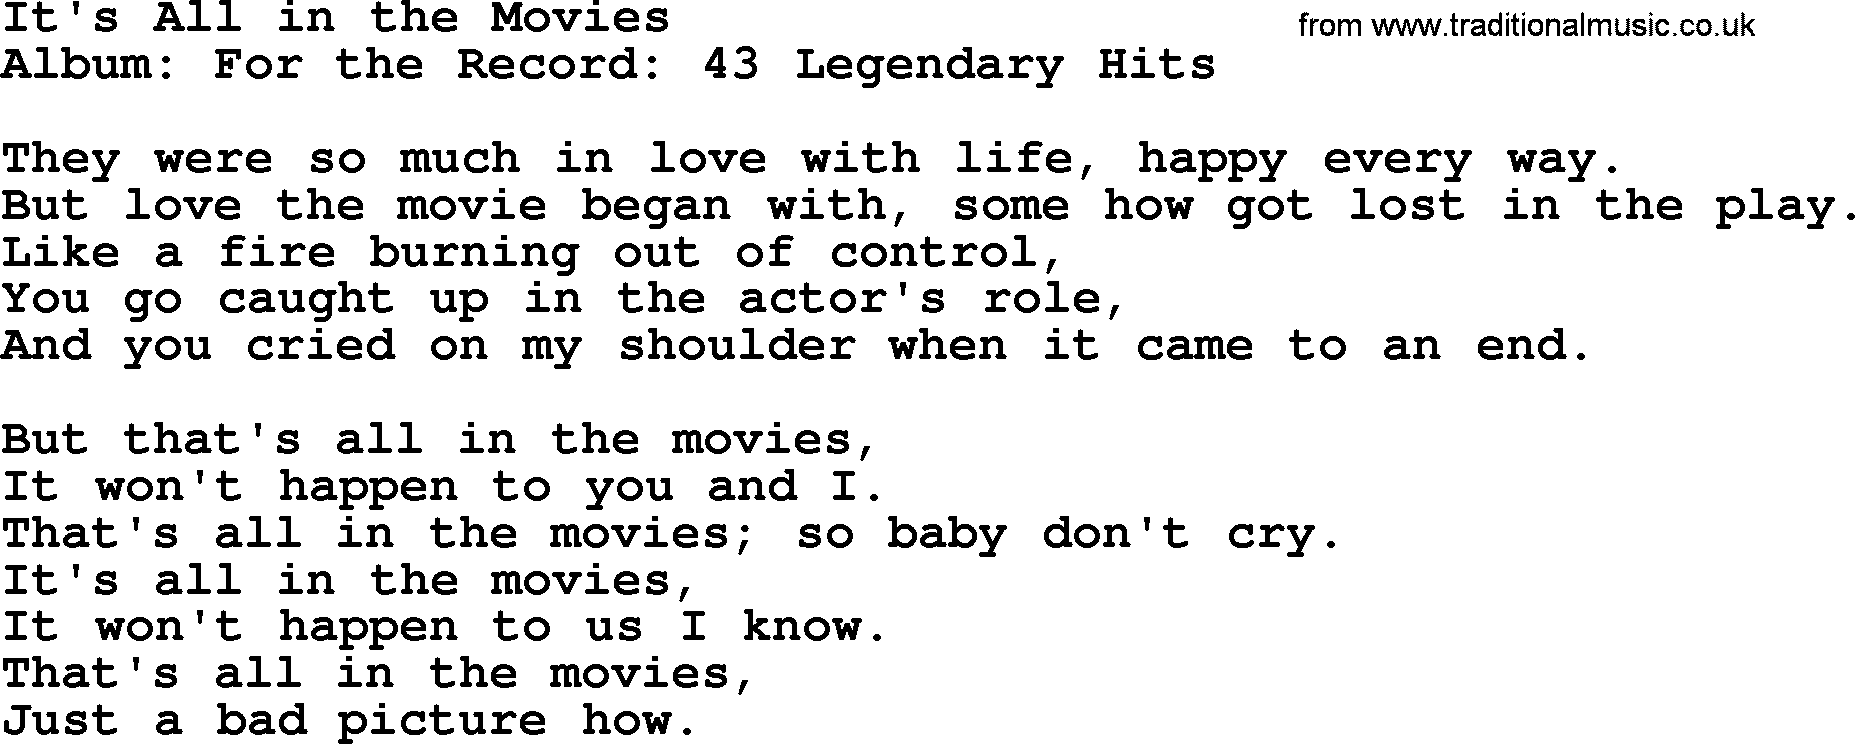 Merle Haggard song: It's All In The Movies, lyrics.